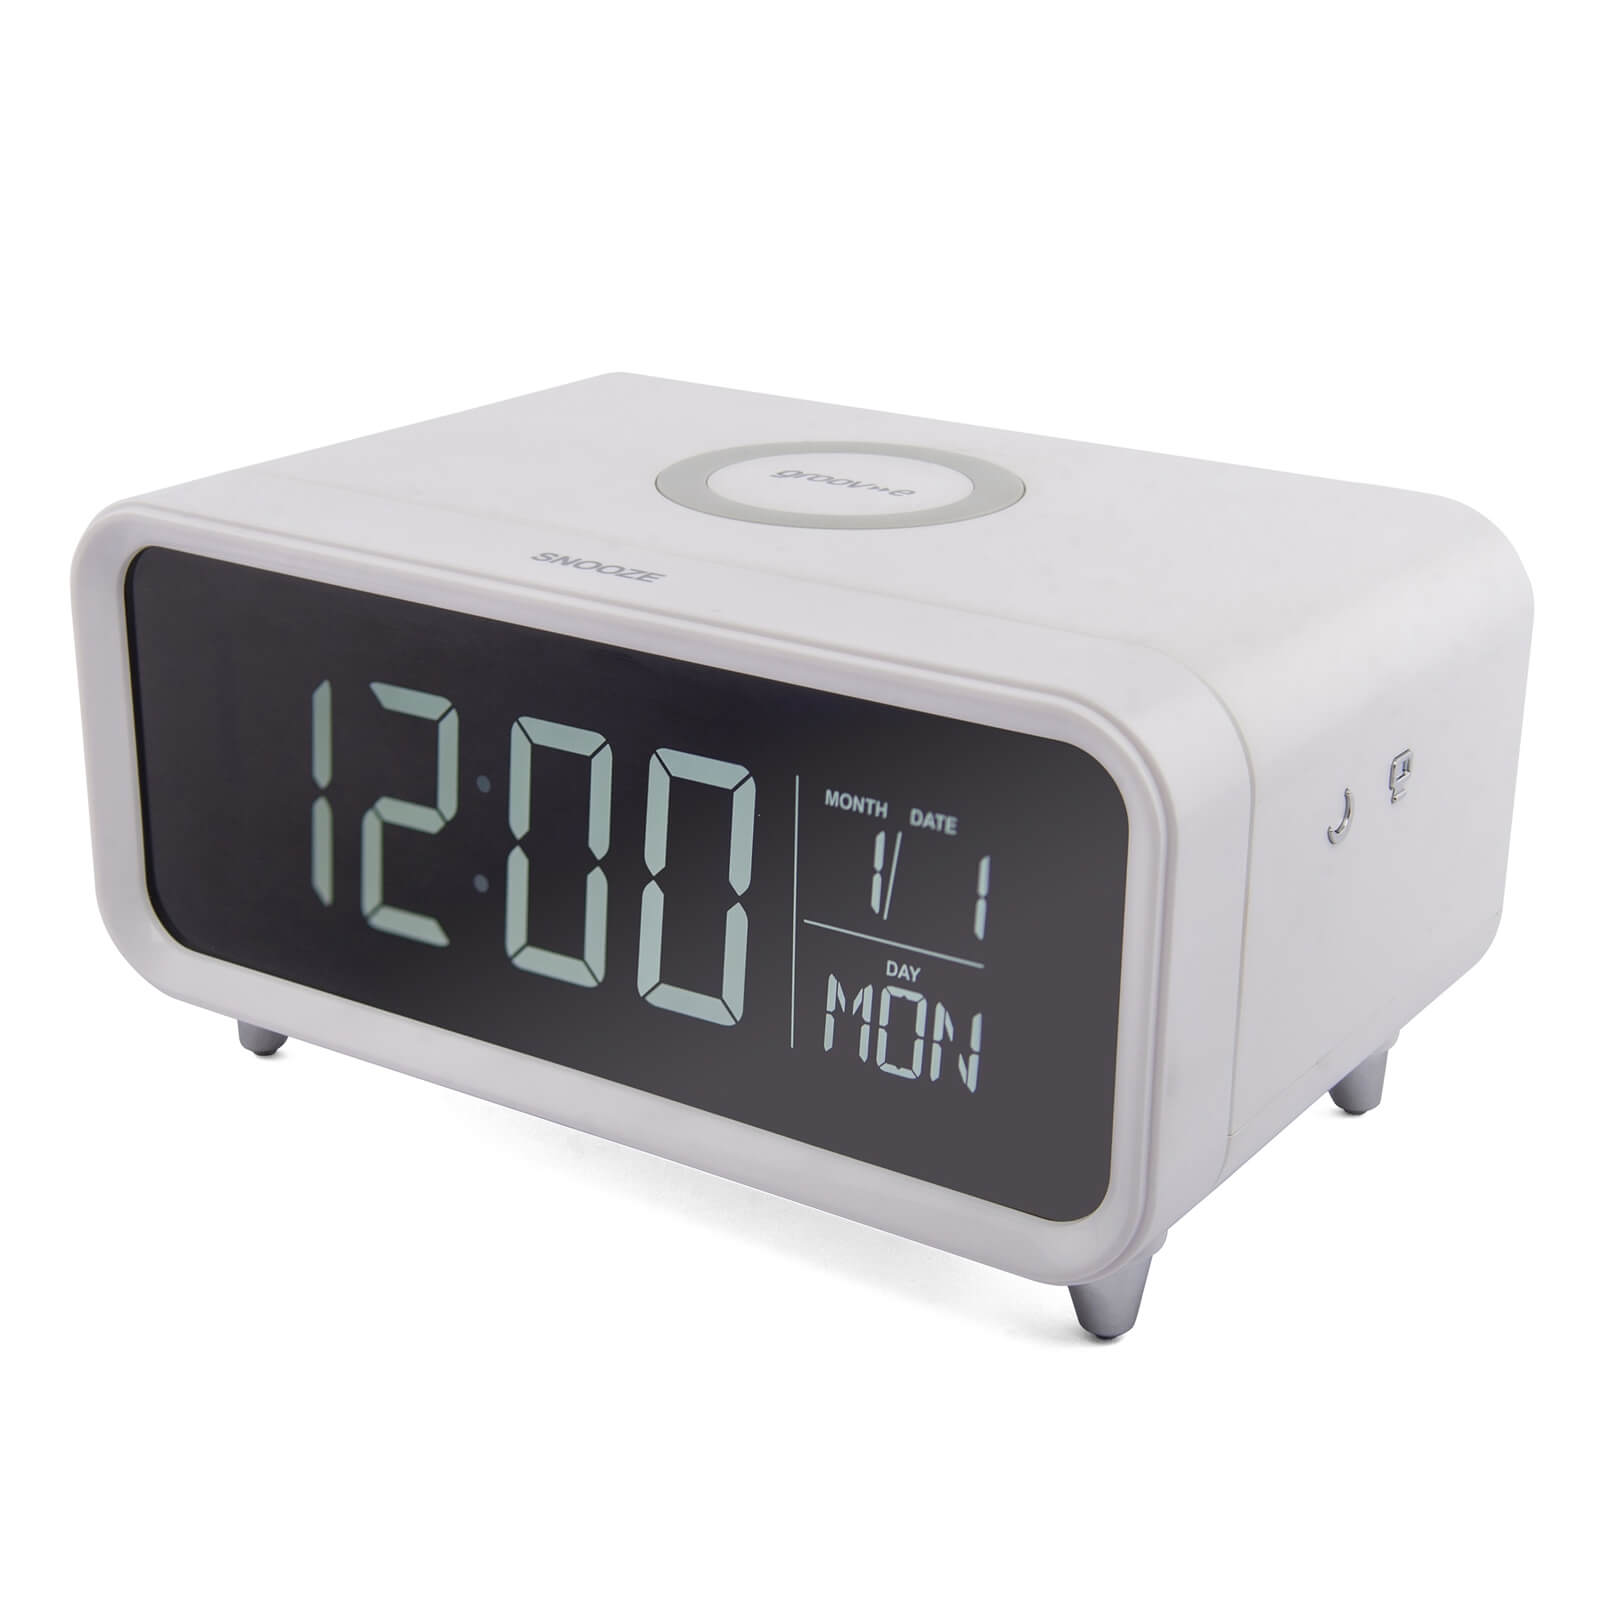 Groov-E Athena Alarm Clock with Wireless Charging Pad - White